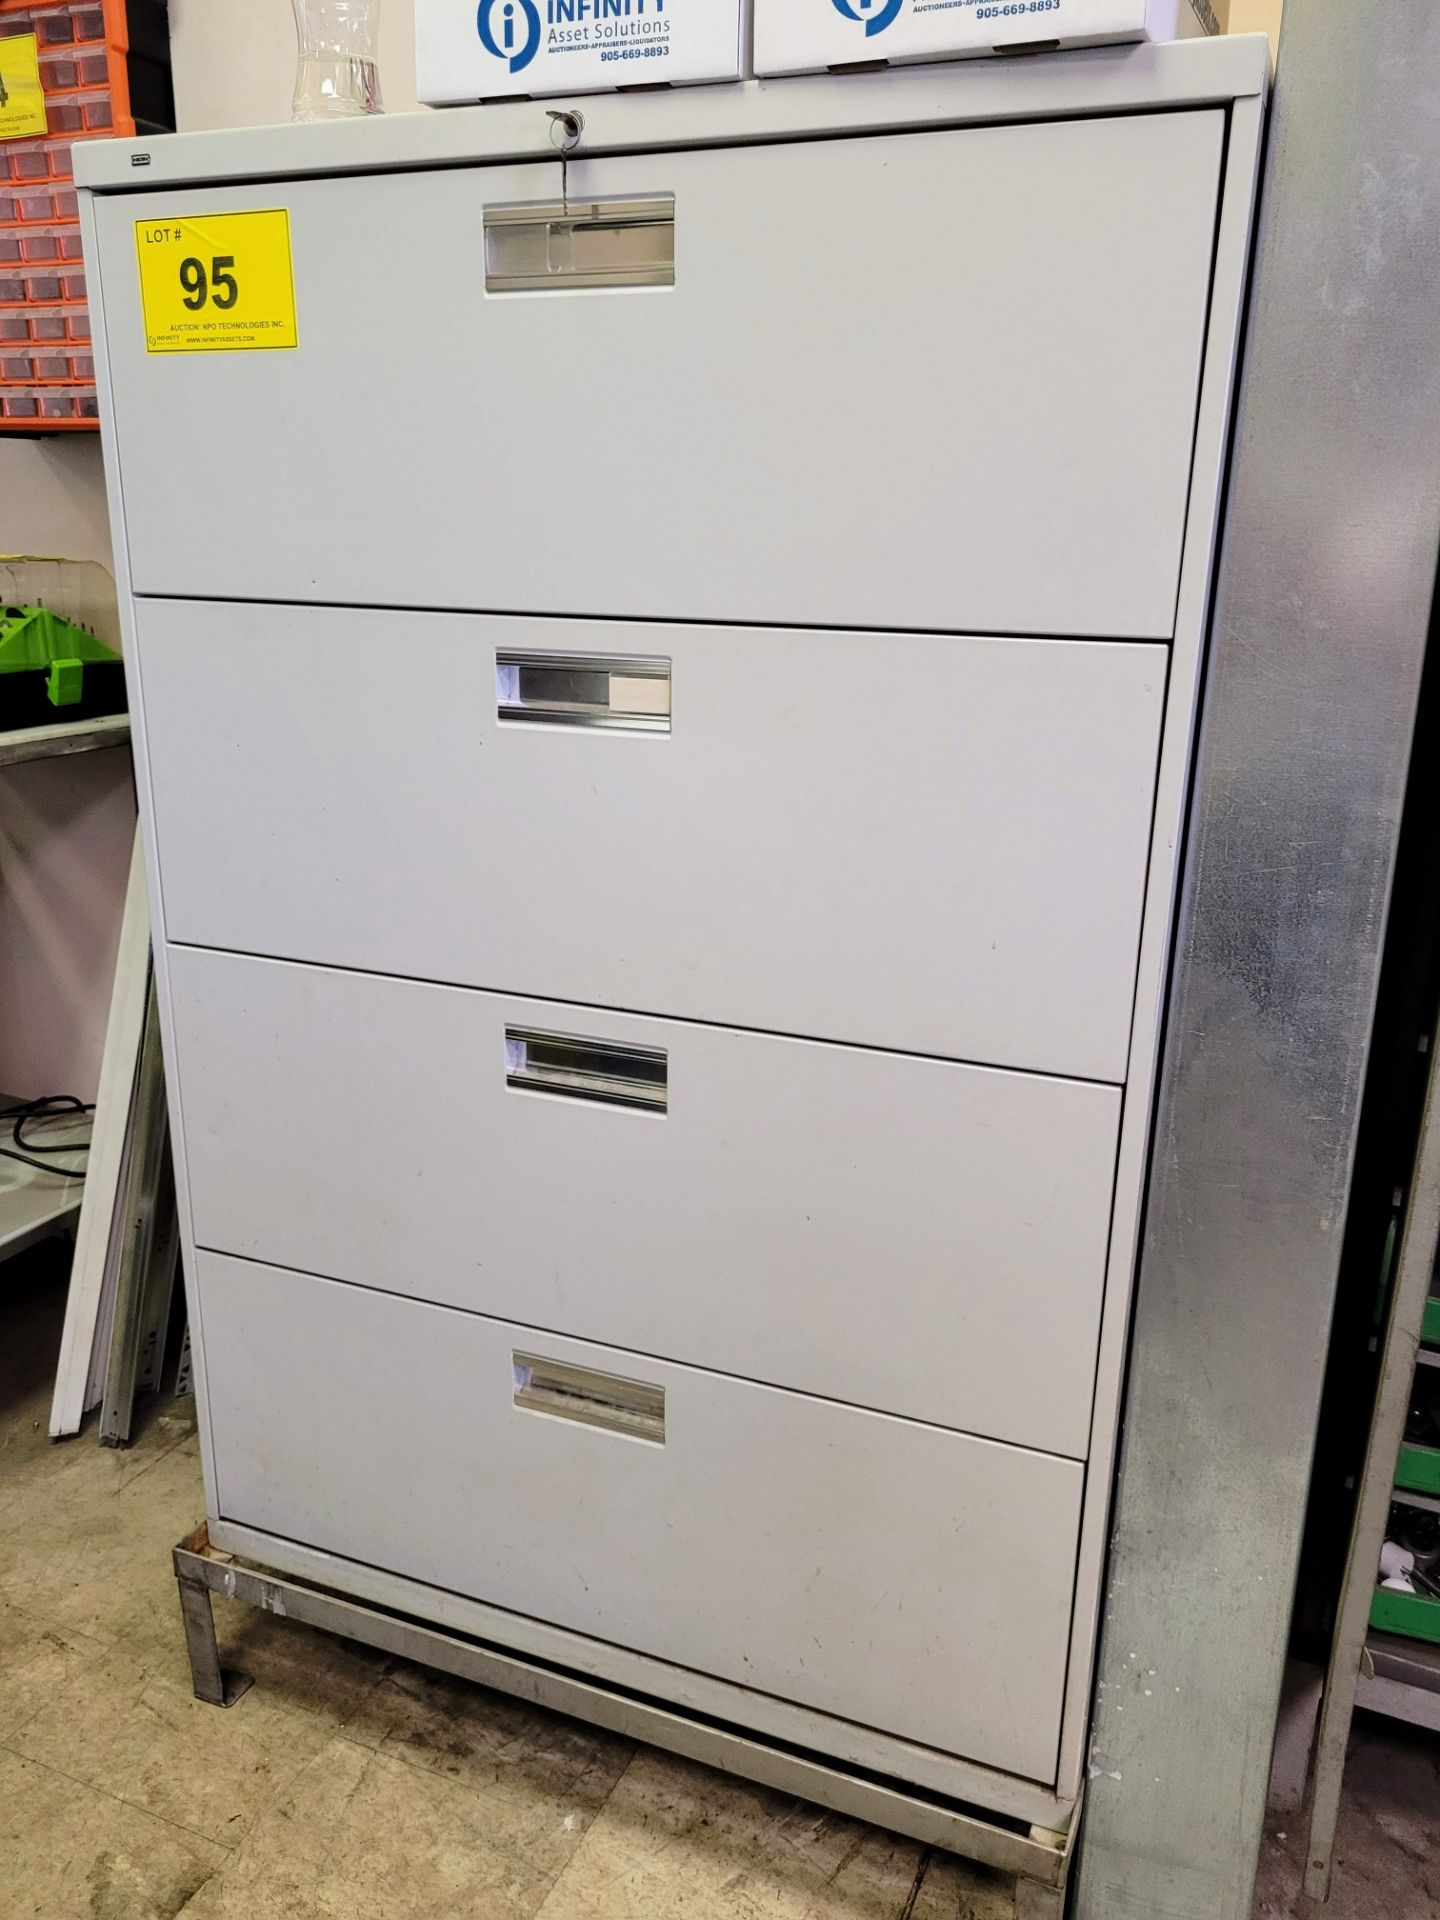 LOT - (3) ASSORTED FILING/STORAGE CABINETS - (NO CONTENTS)